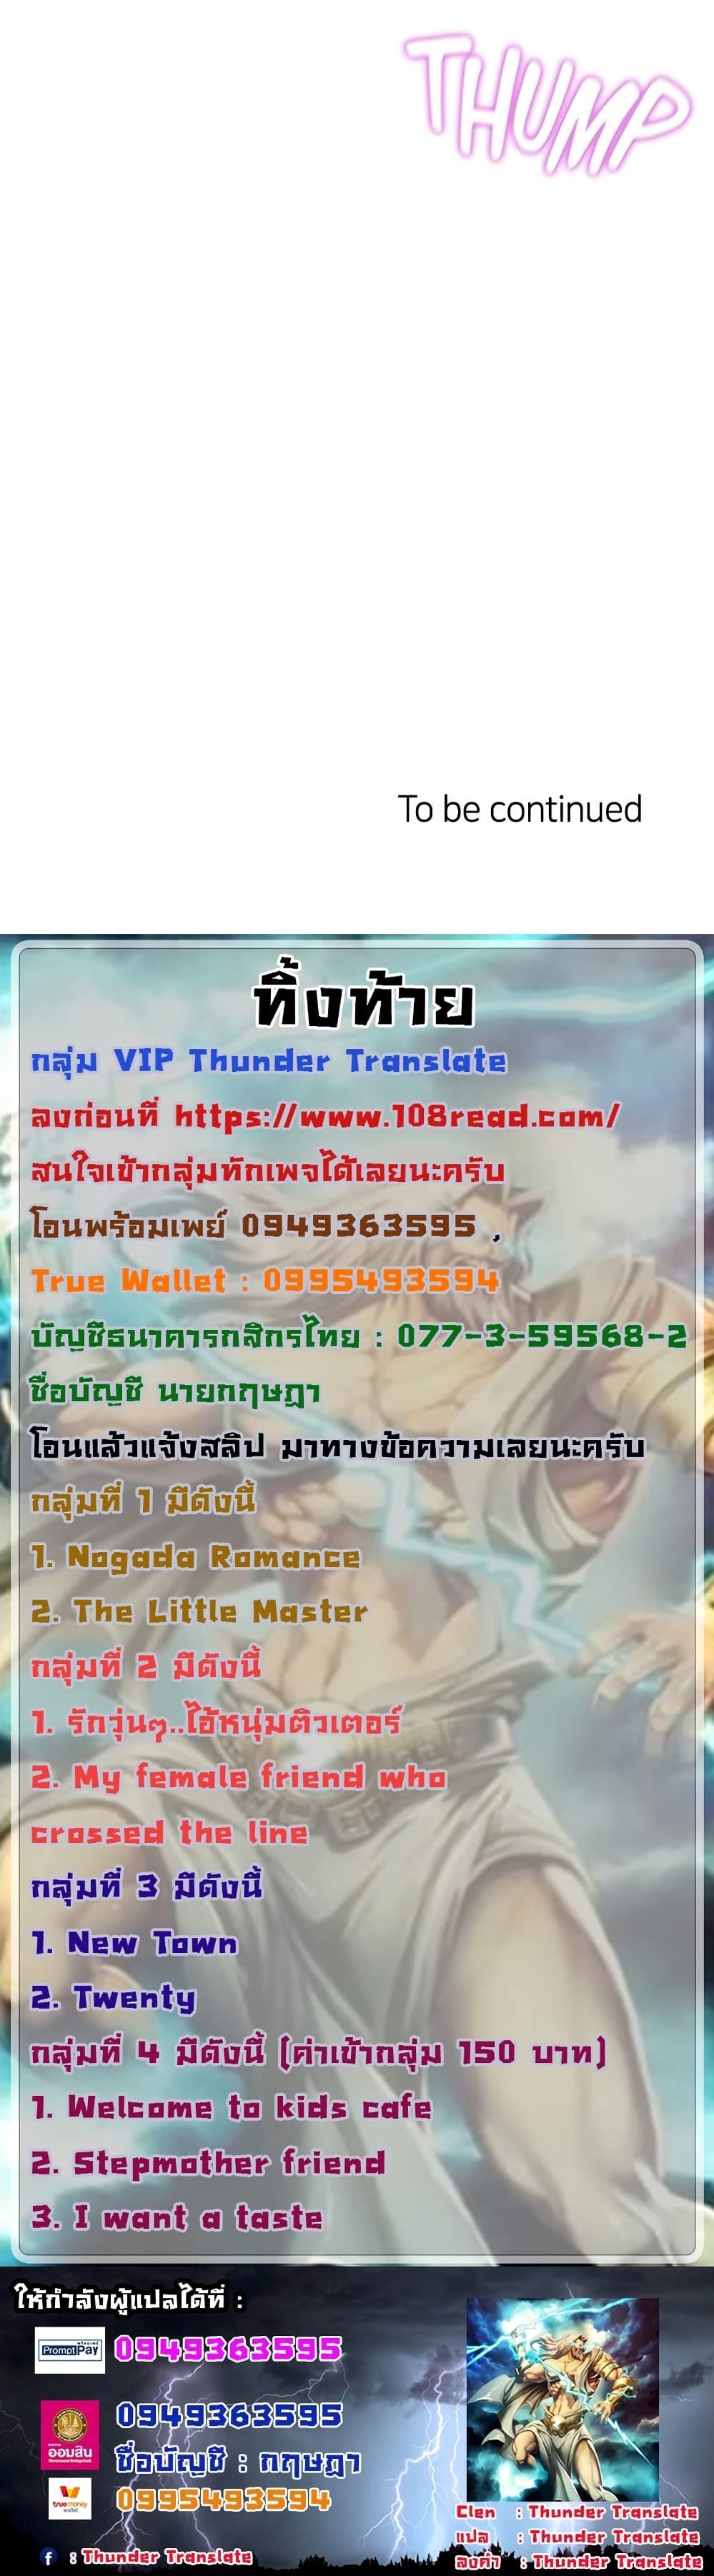 Welcome To Kids Cafe’ 11 ภาพ 27